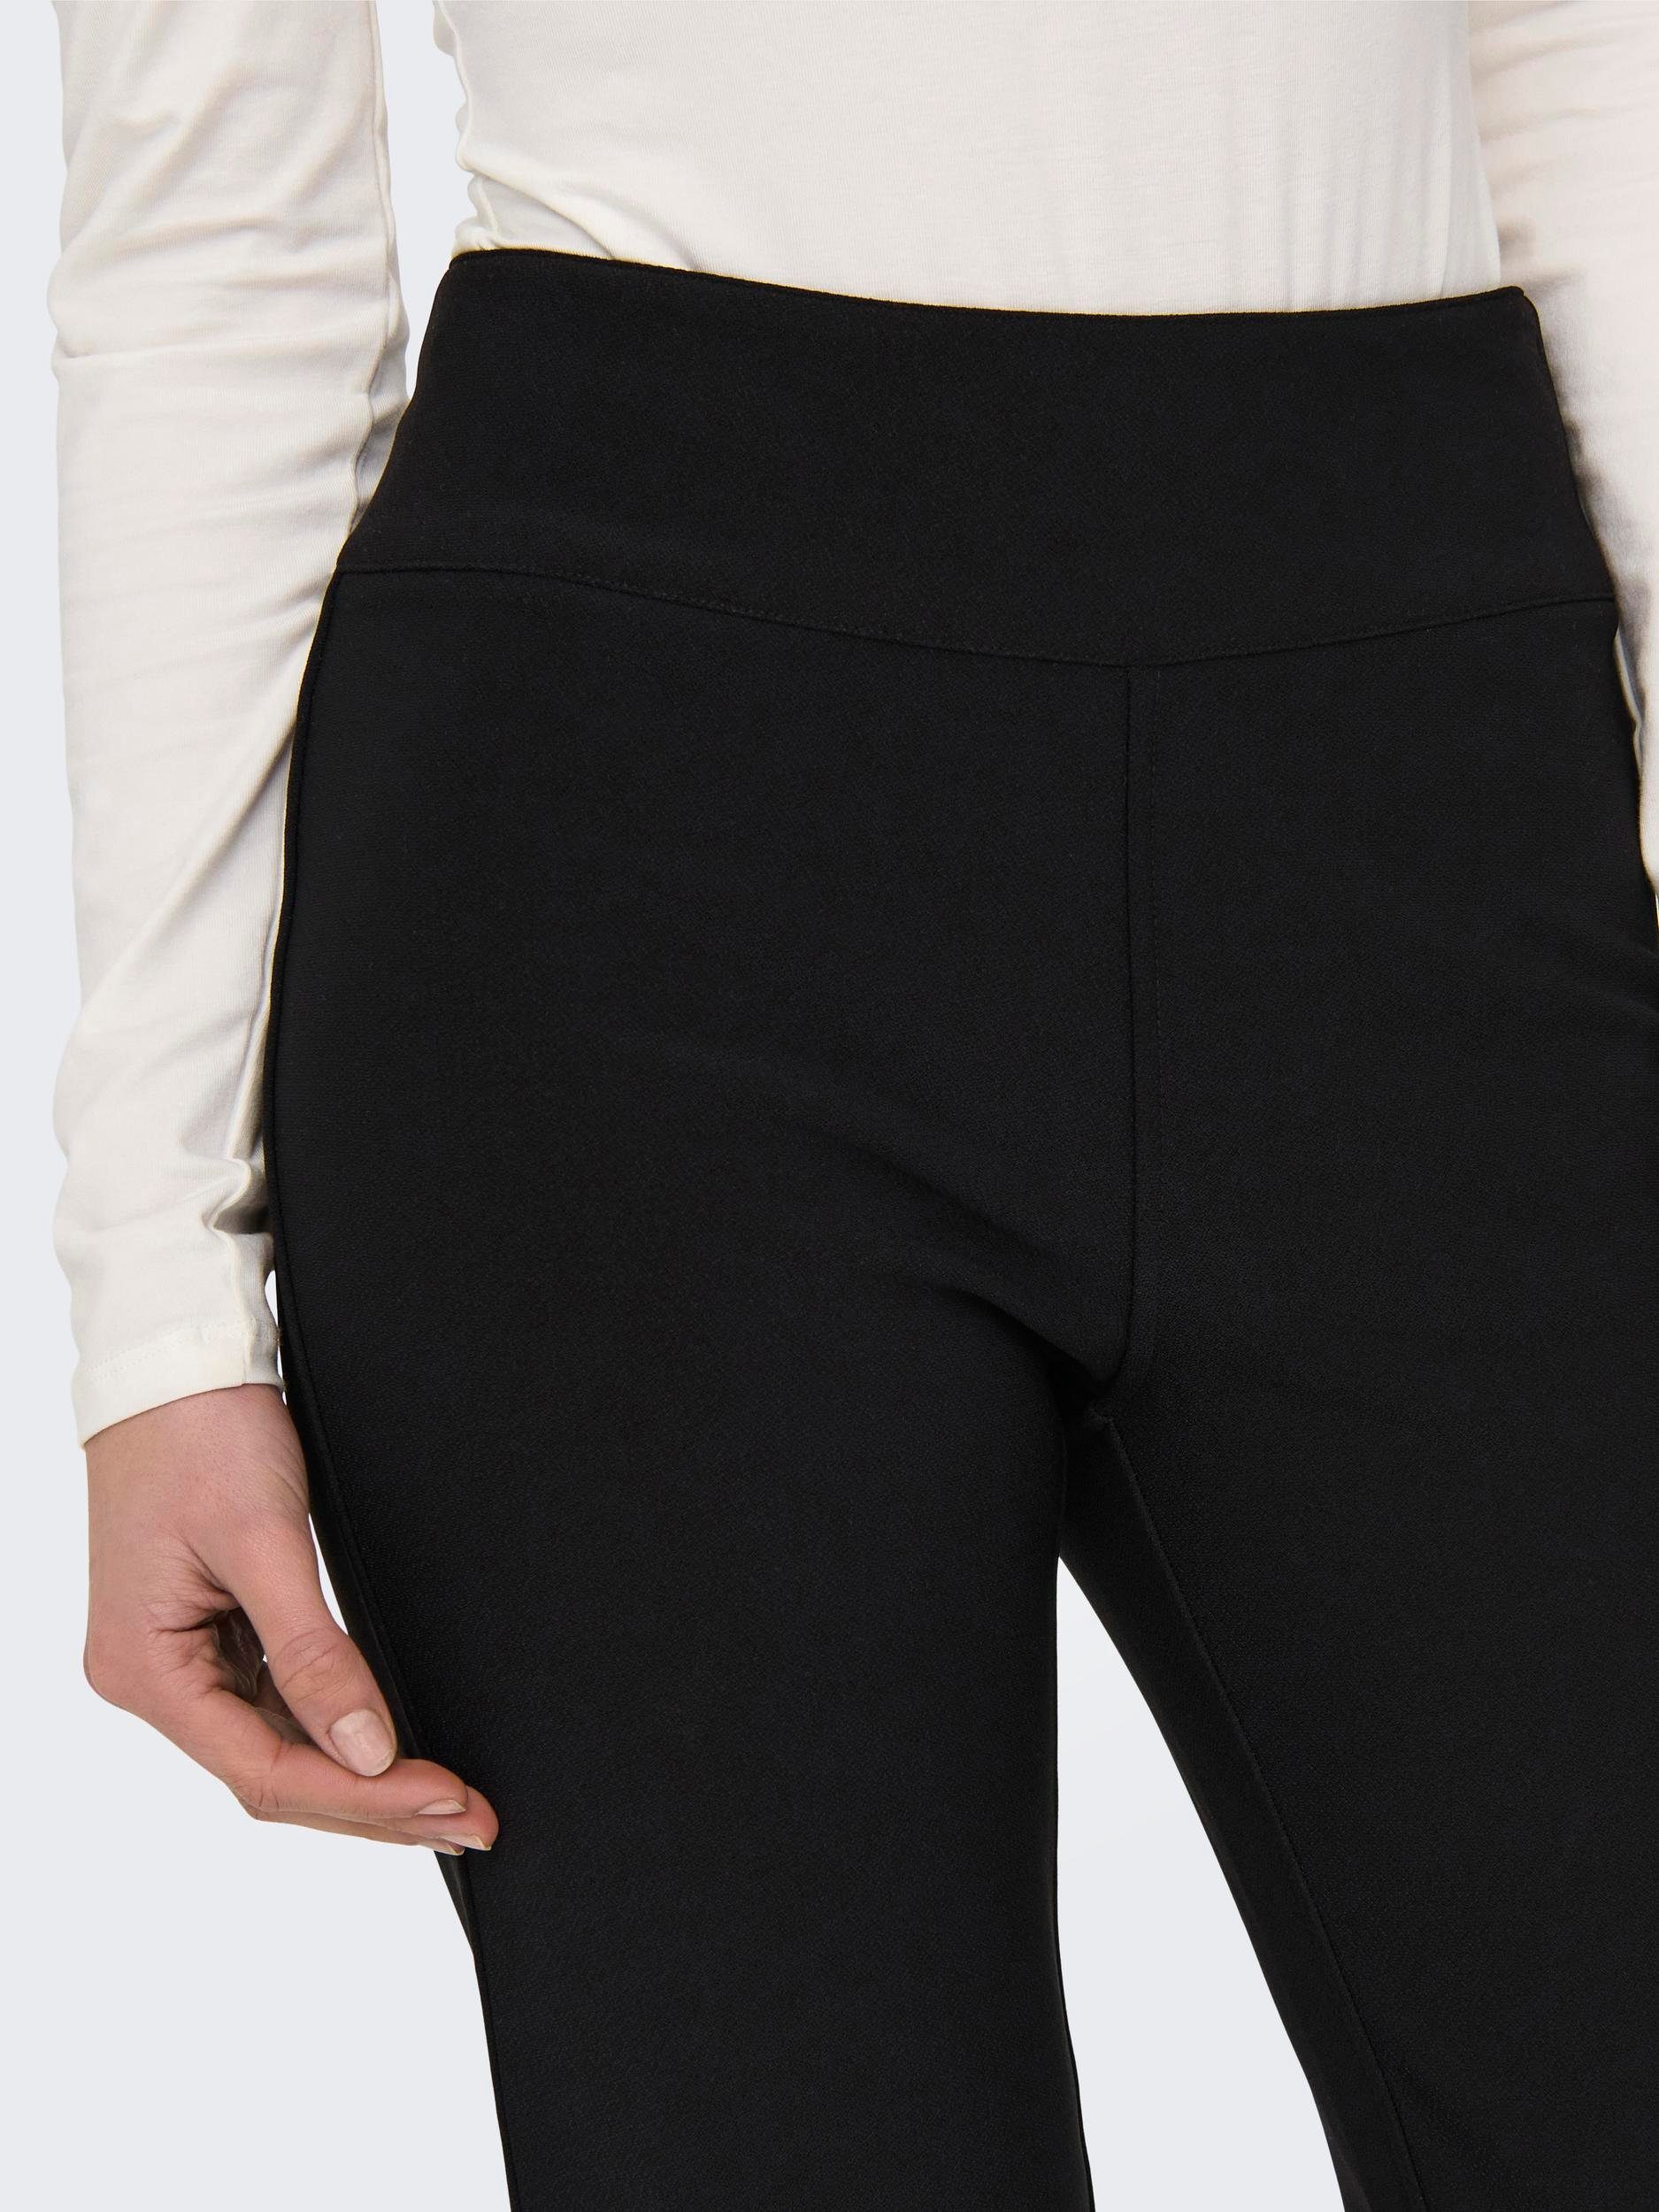 ONLY Leggings PNT, ONLCLEVER WIDE elastisches BAND und PANT LONG Pflegeleichtes Material